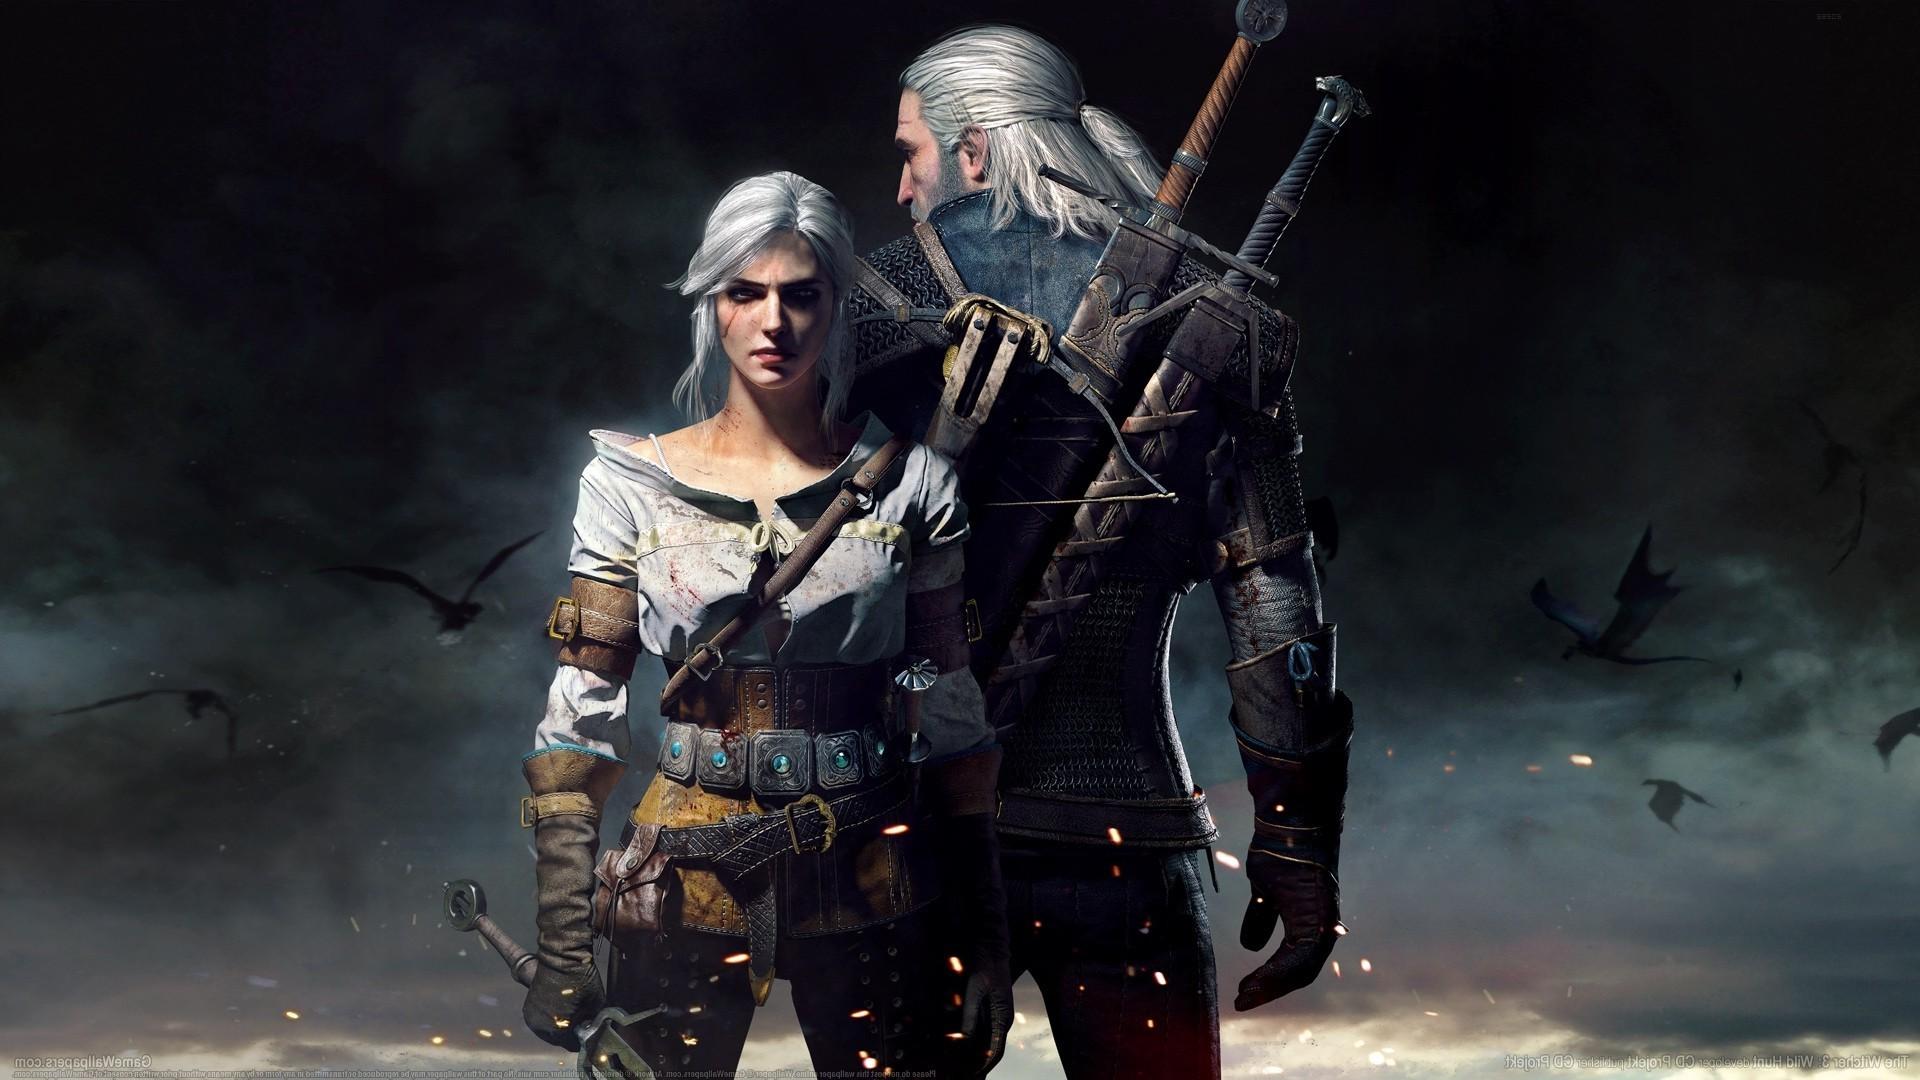 1920 x 1080 · jpeg - The Witcher 3: Wild Hunt Wallpapers HD / Desktop and Mobile Backgrounds